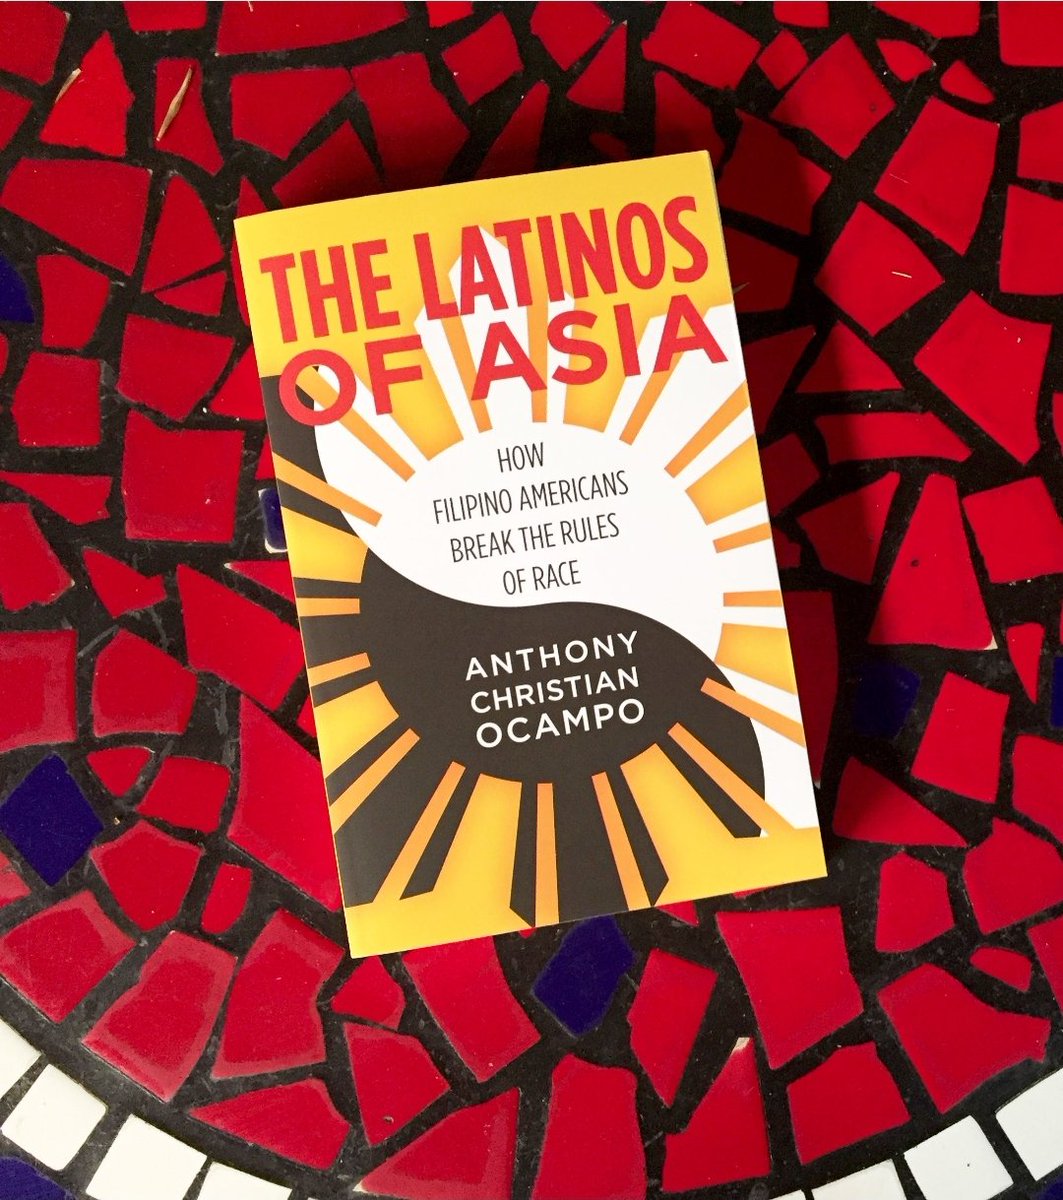 Further reading: In The Latinos of Asia,  @anthonyocampo addresses the puzzle: Are Filipinos in the United States becoming Asian American or Latino? He highlights how Filipino American identities can change depending on the communities they grow up in and the people they befriend.